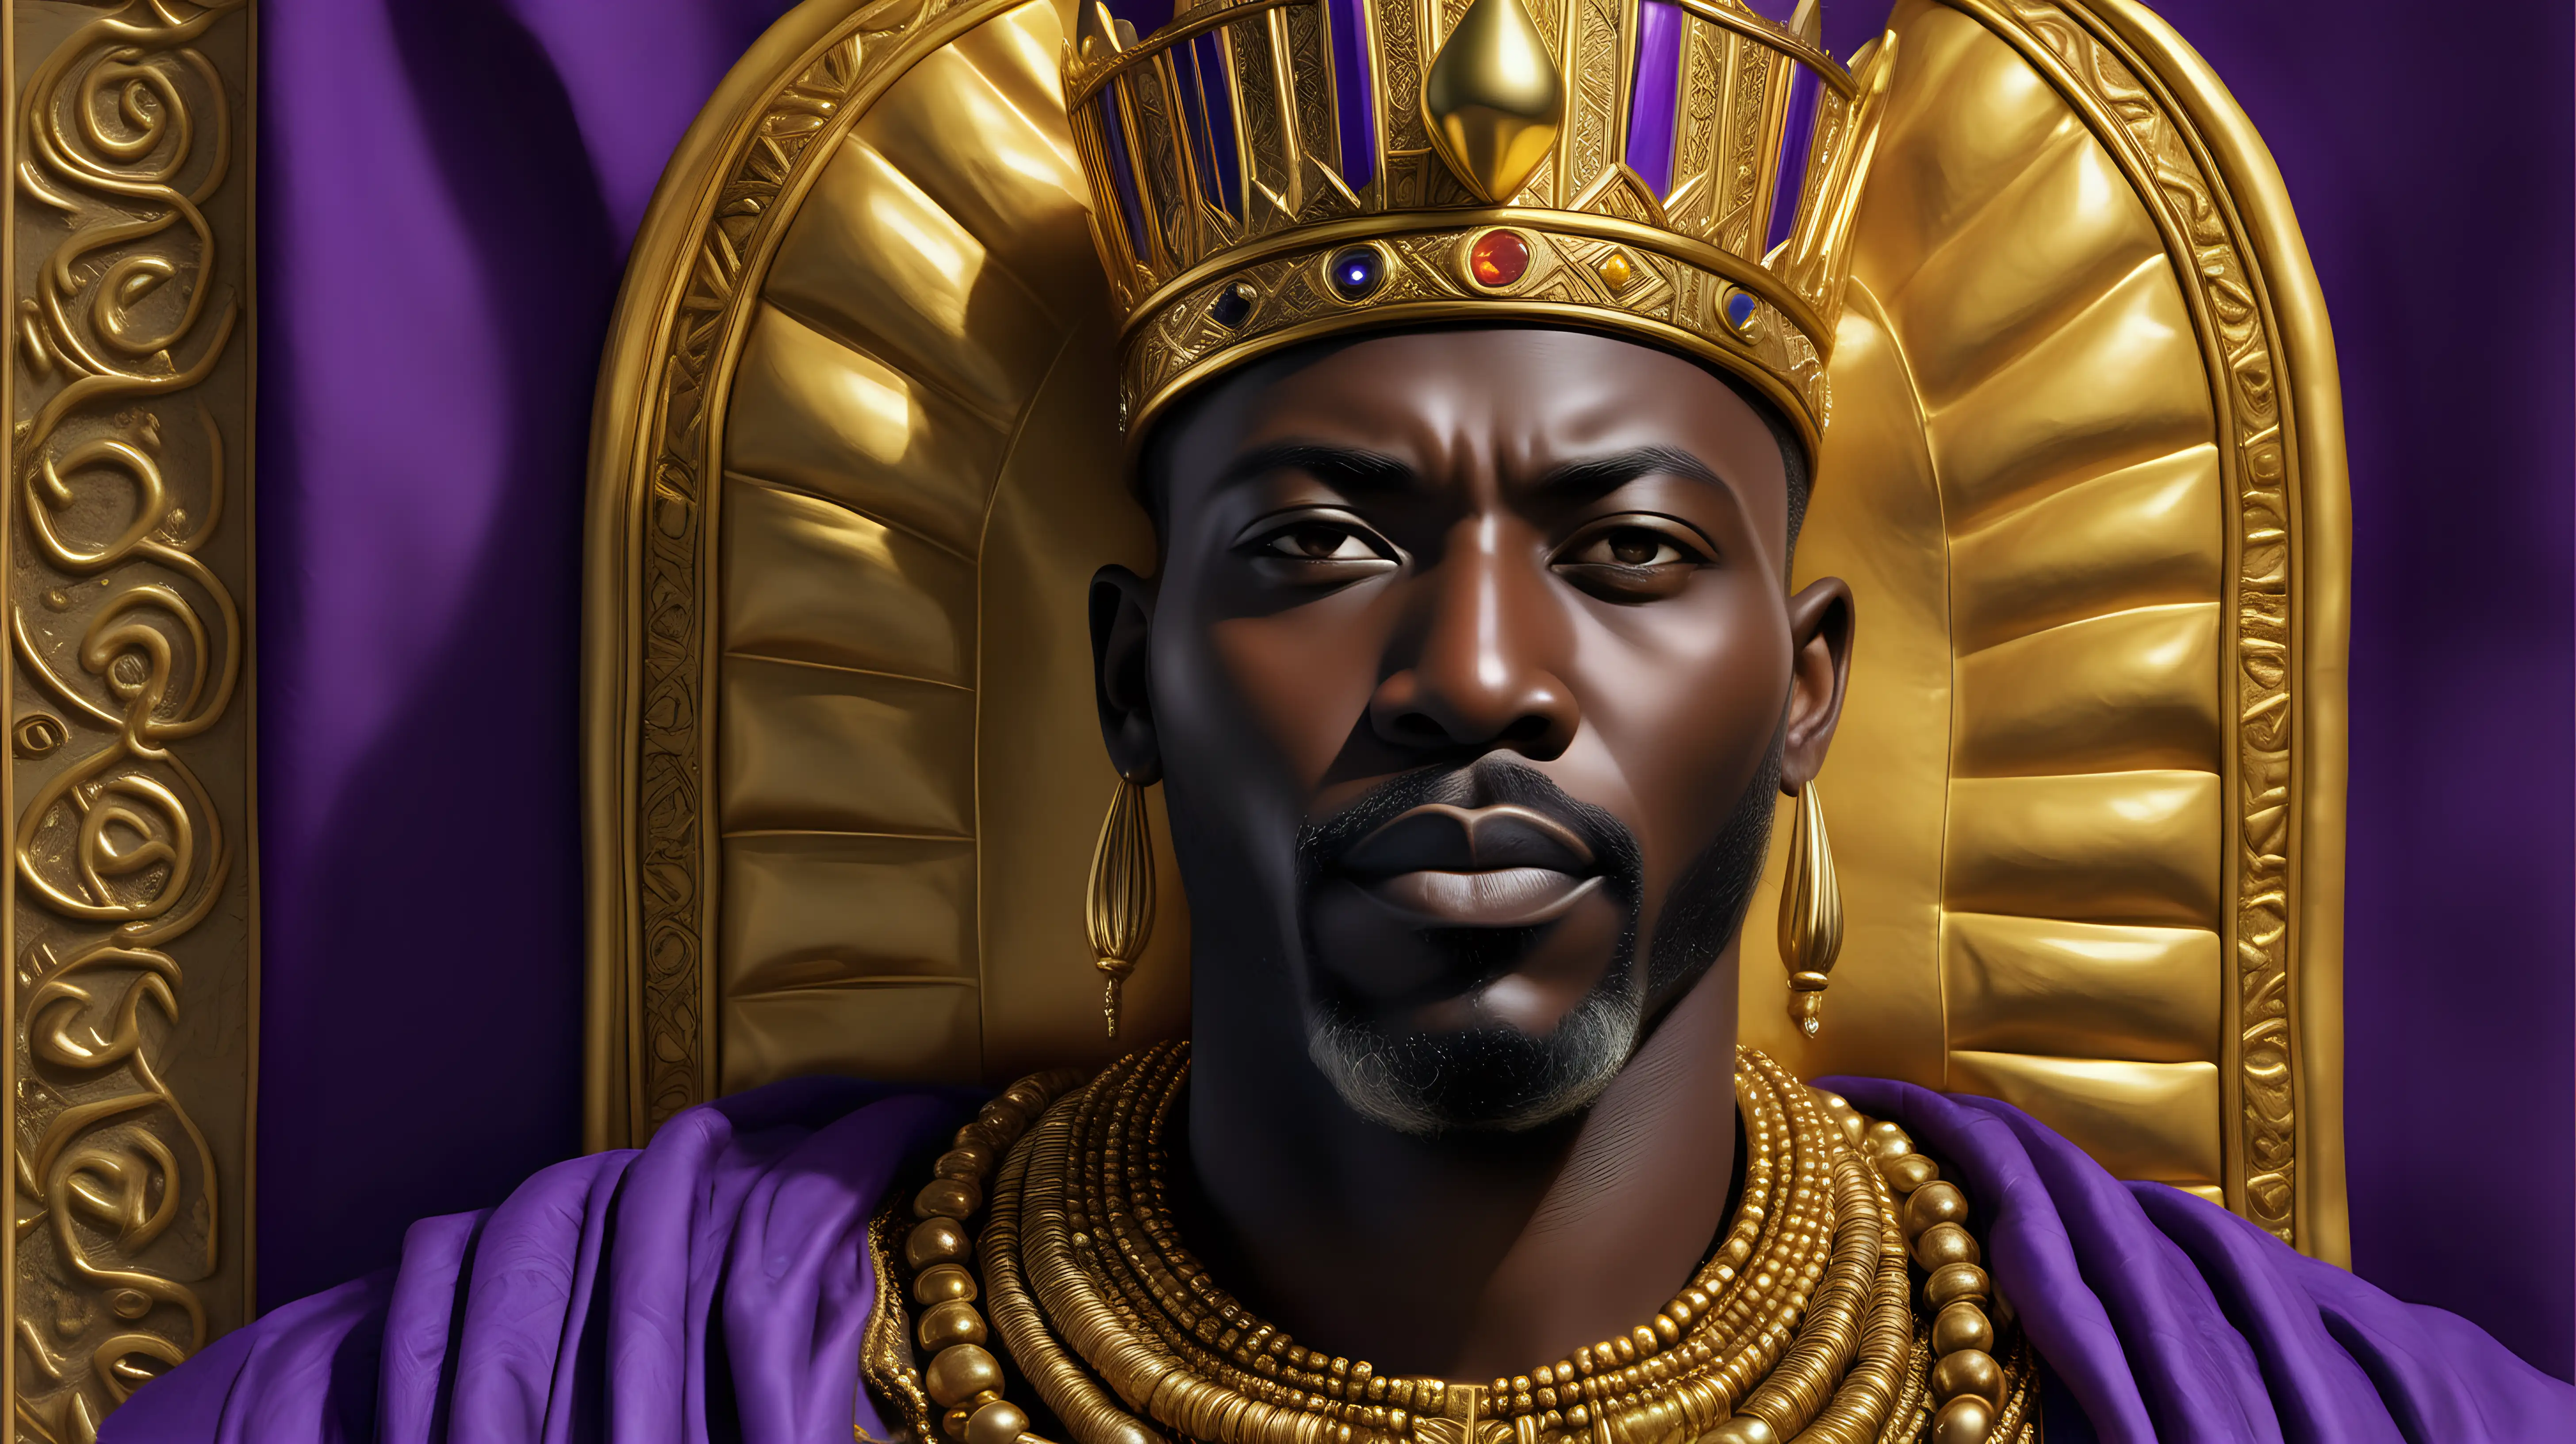 Mansa Musa Regal Portrait of the Wealthy King of Mali